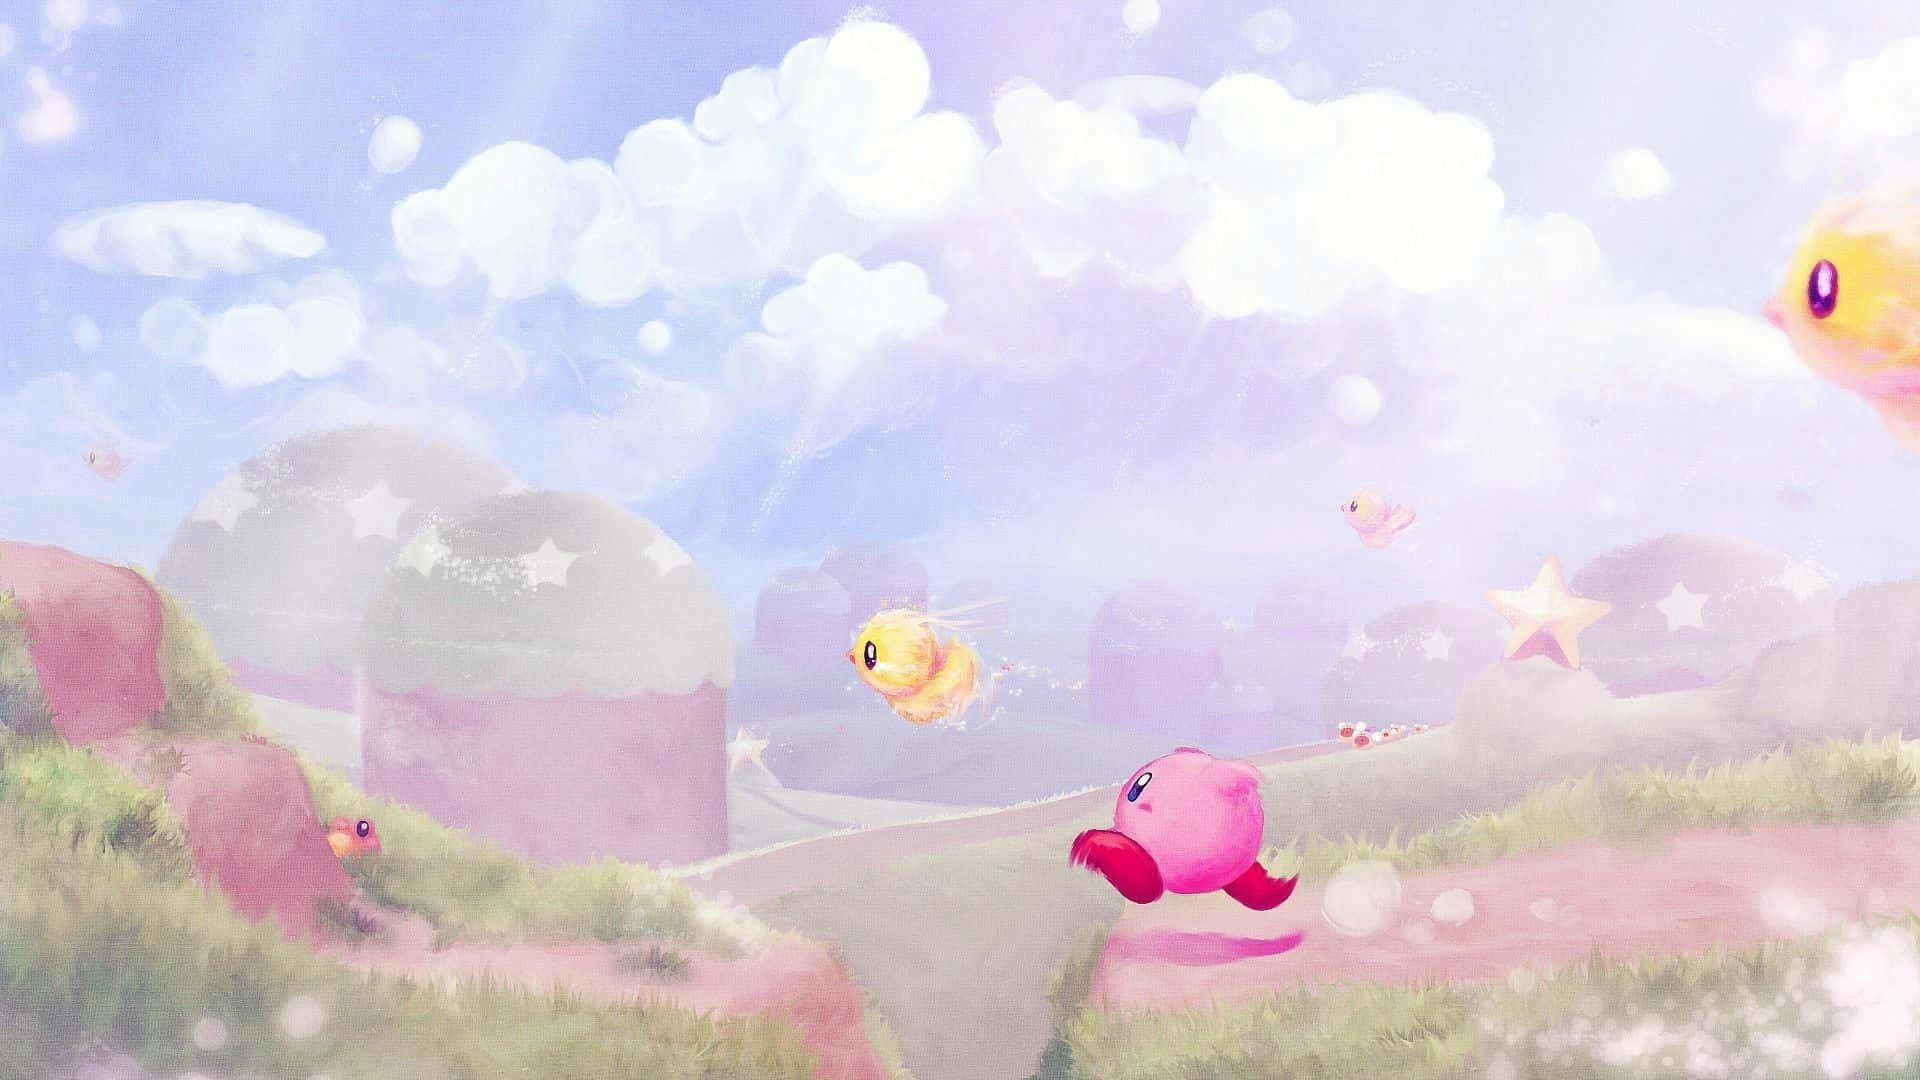 "Bringing Joy to Life: Kirby Helps Players Go on Adventures!"